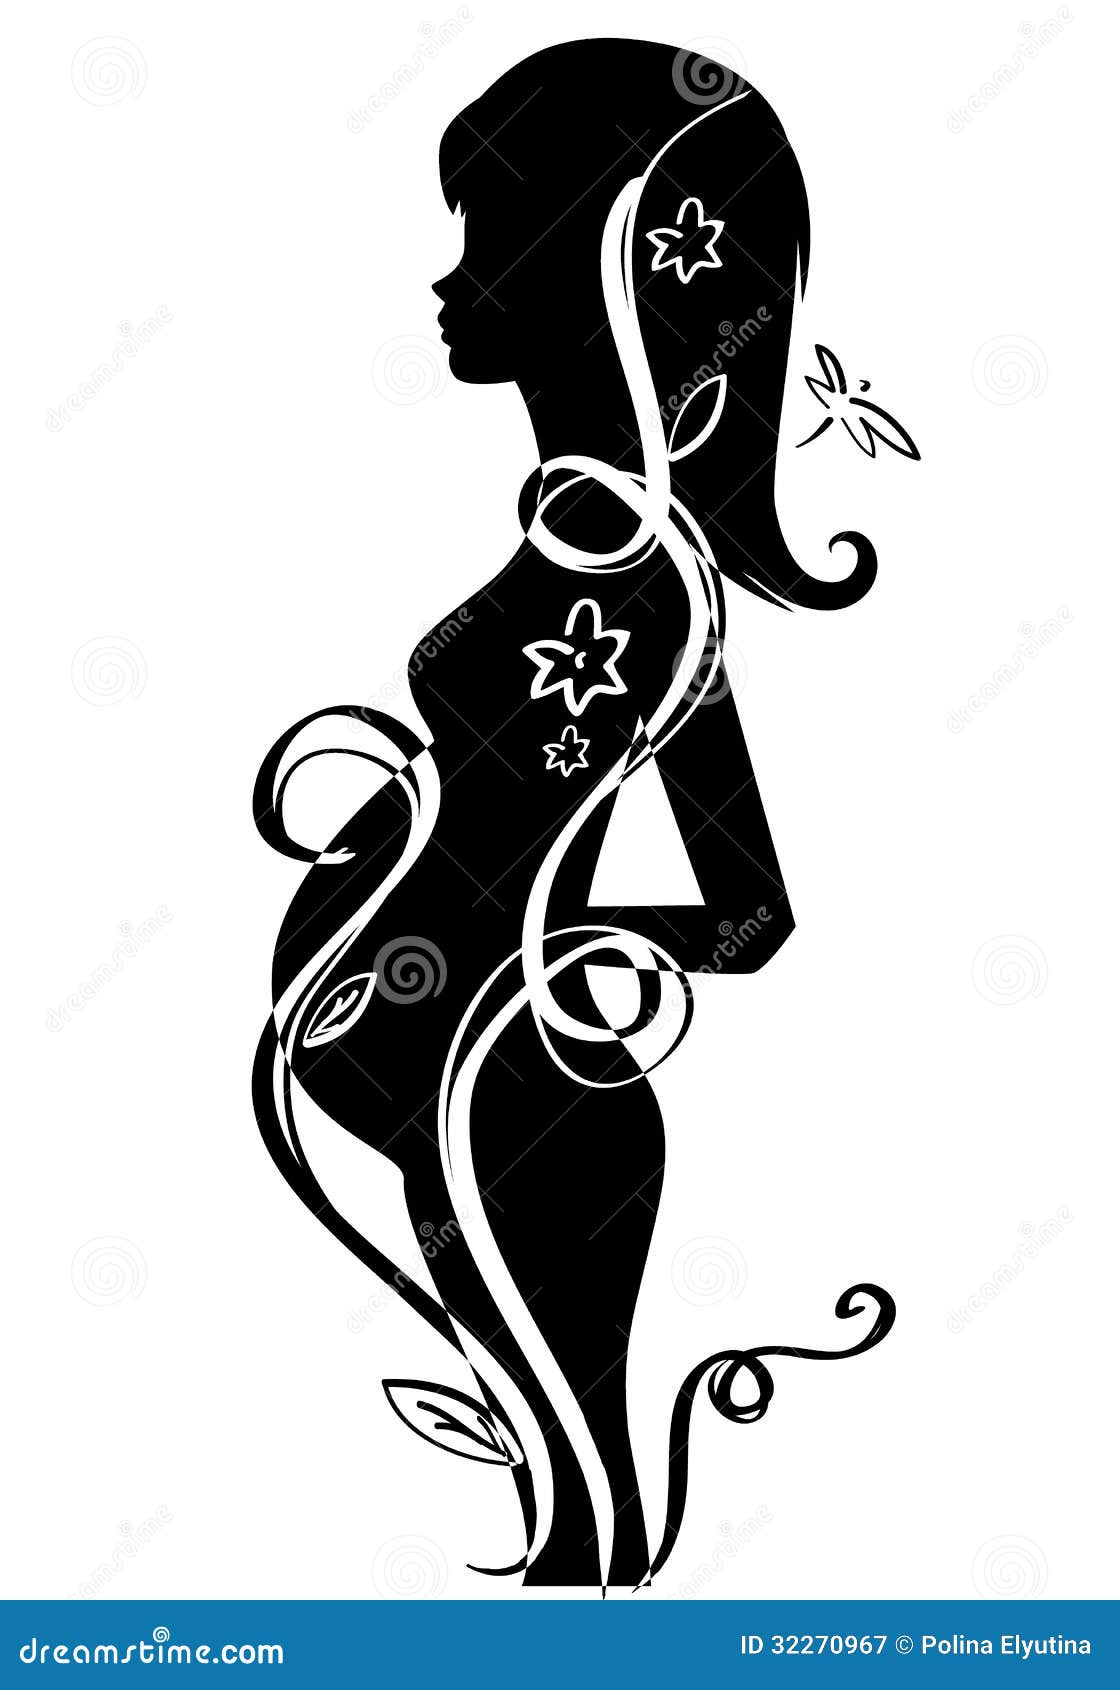 Black Sihouette of Pregnant Stock Vector - Illustration of ...